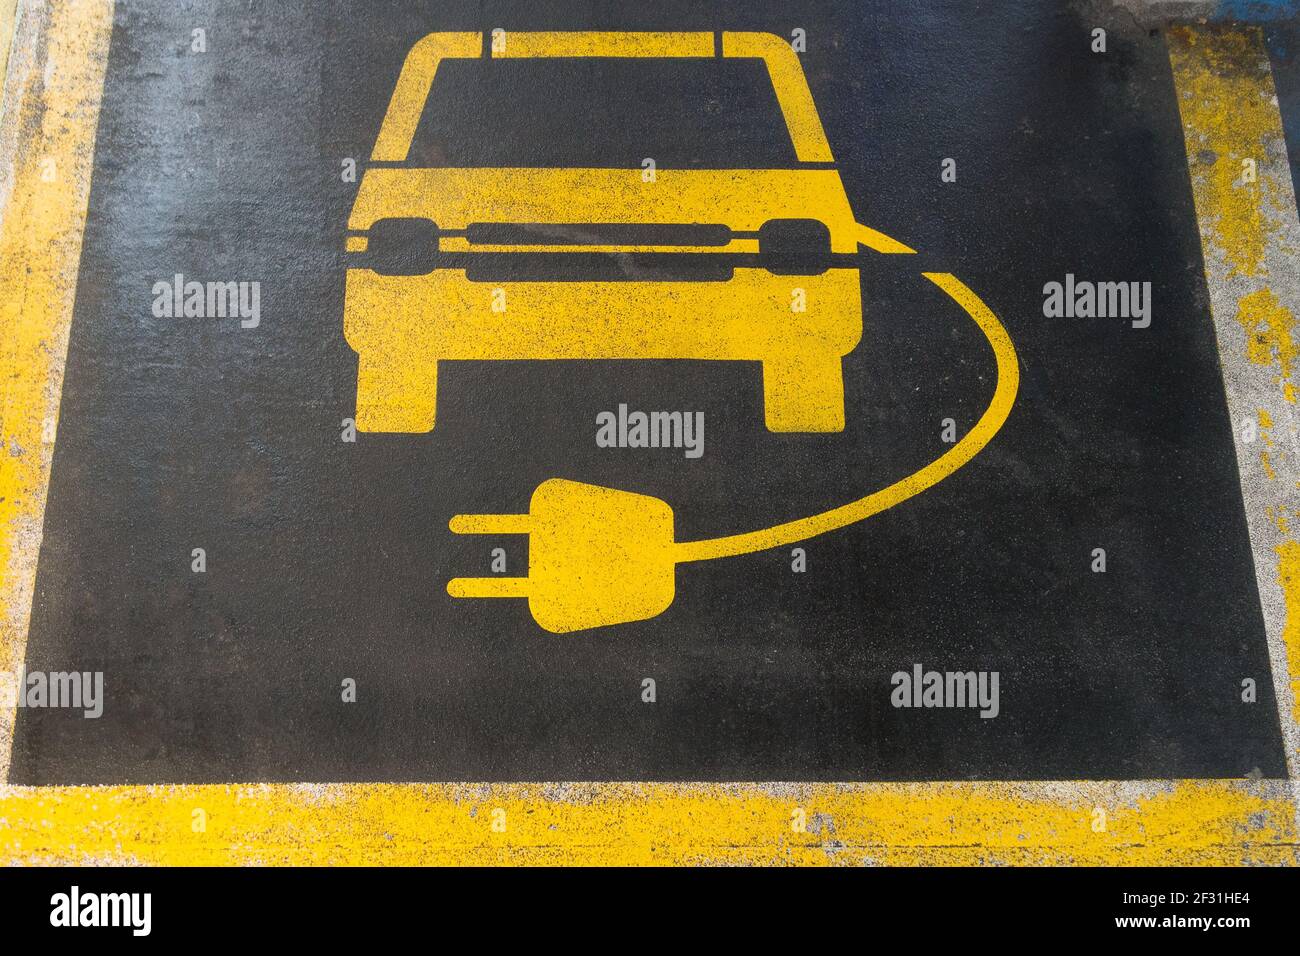 Line markings in a car parking bay in yellow on black tarmac of a car and electric charging lead are visible. Stock Photo